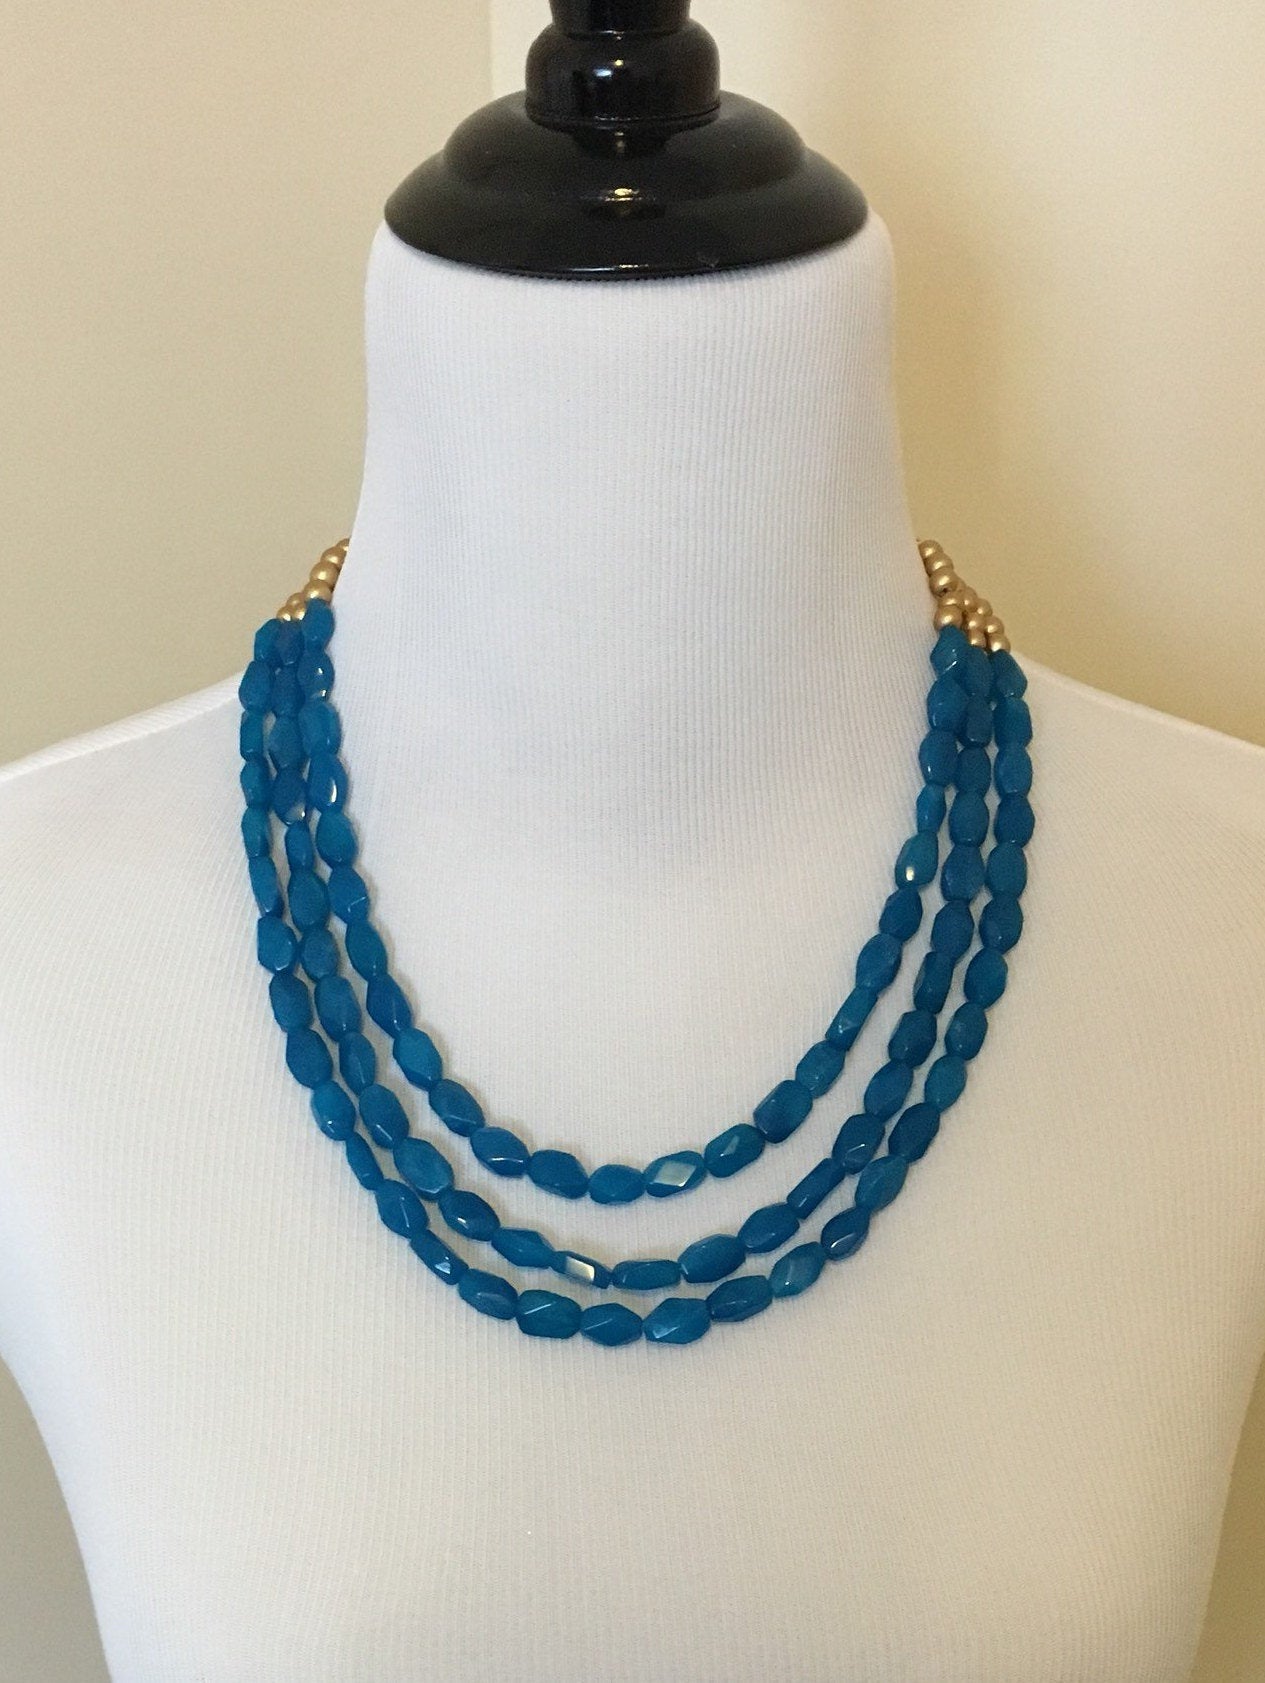 Mannequin wearing Three strand turquoise quartz and gold wooden beaded necklace close up.